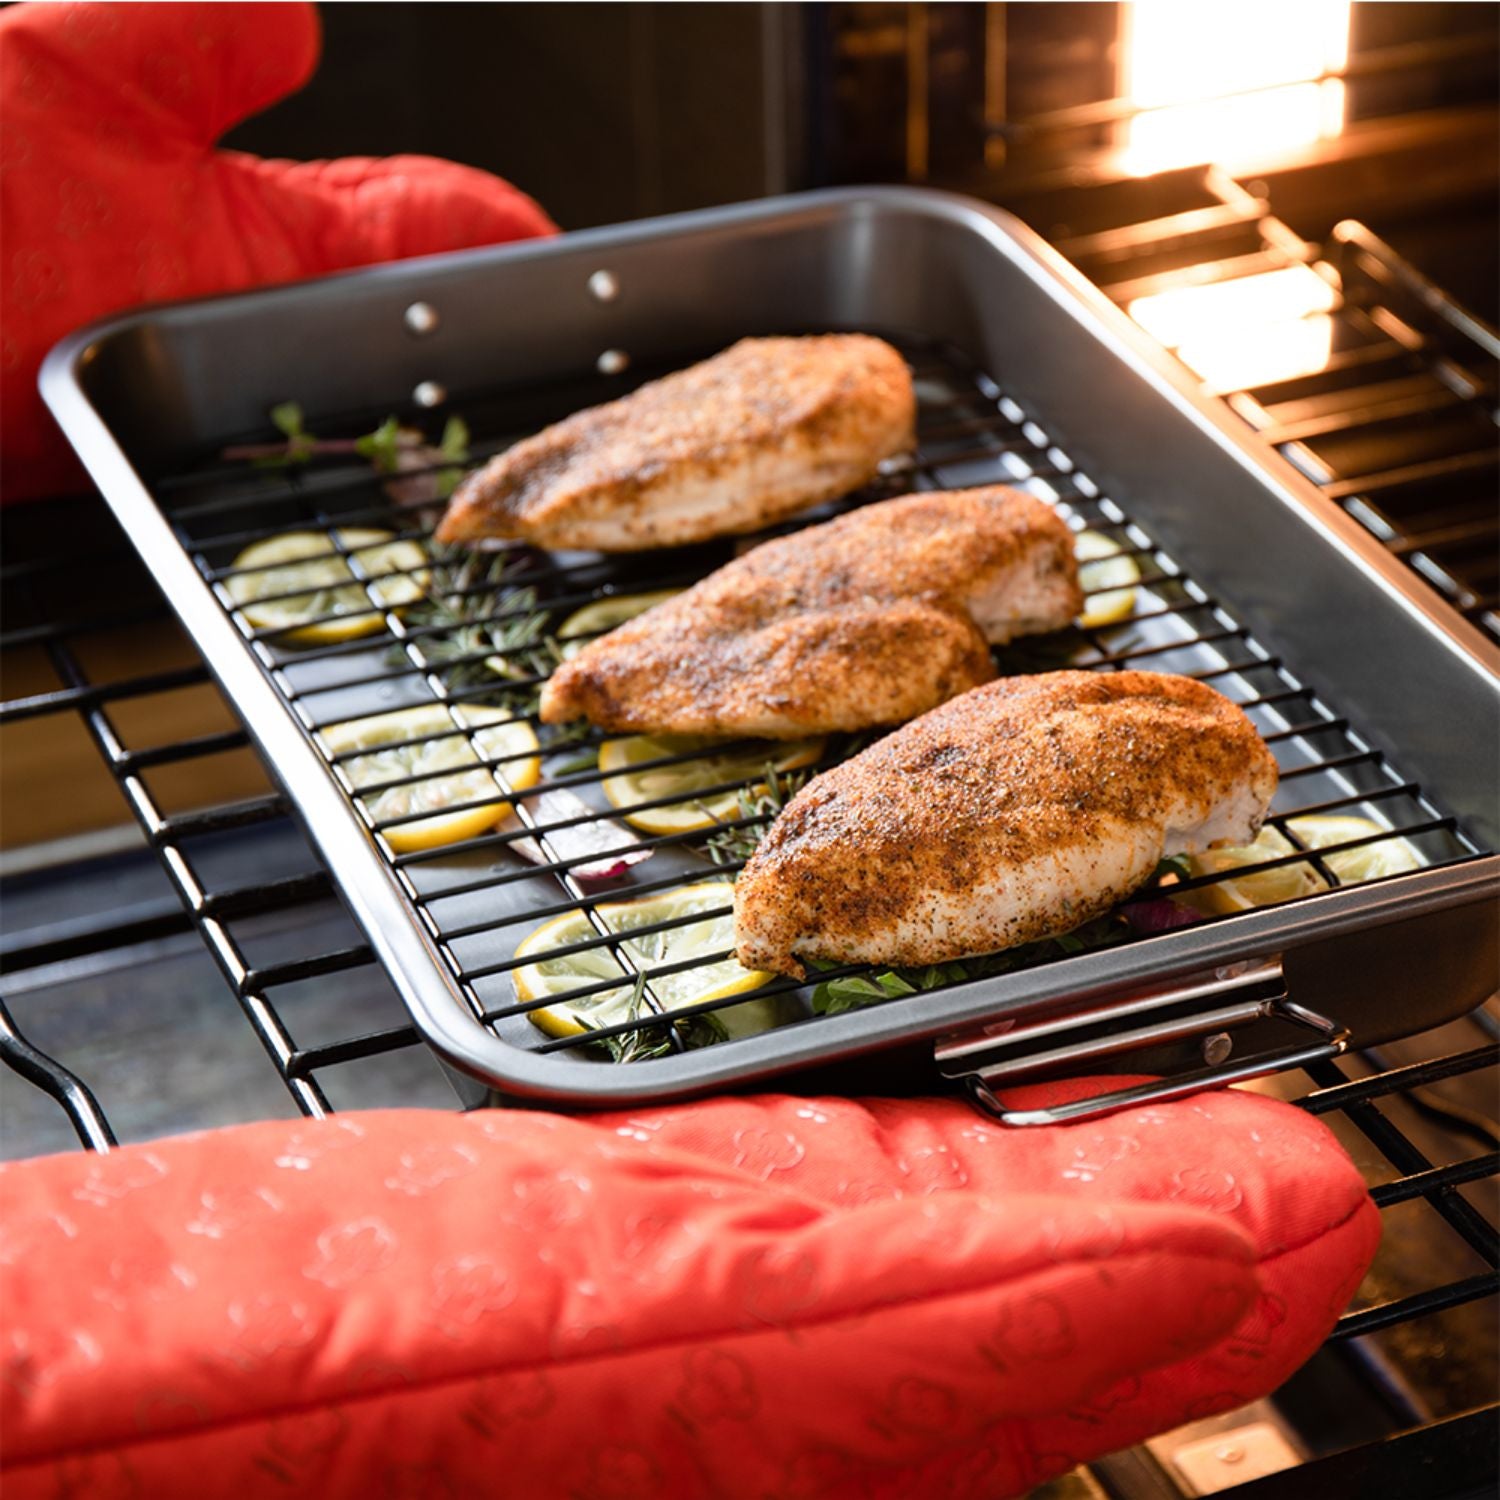 Chef Pomodoro - Grey, 16 x 11-Inch, Large Nonstick Carbon Steel Roasting Pan  Roaster with Flat Rack